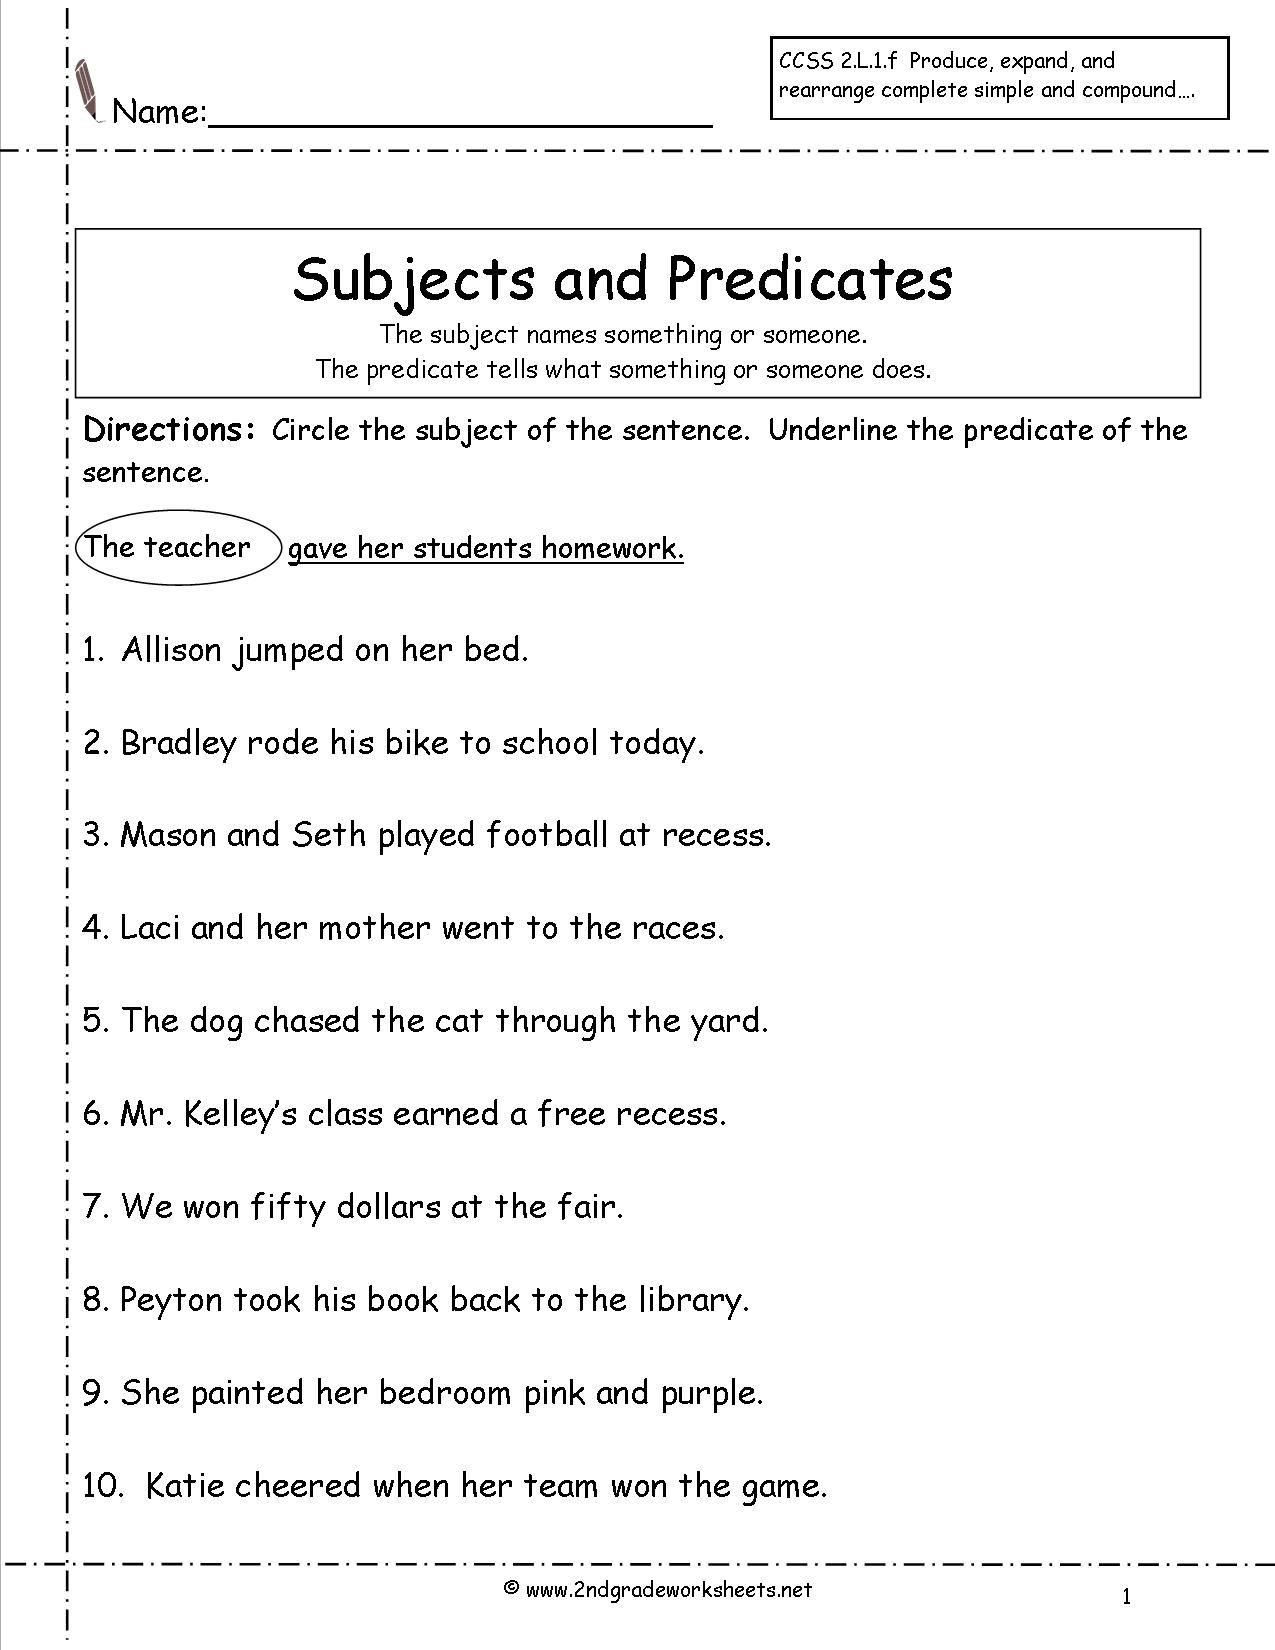 Subjects and Predicates Worksheet Subject Predicate Worksheets 2nd Grade Google Search